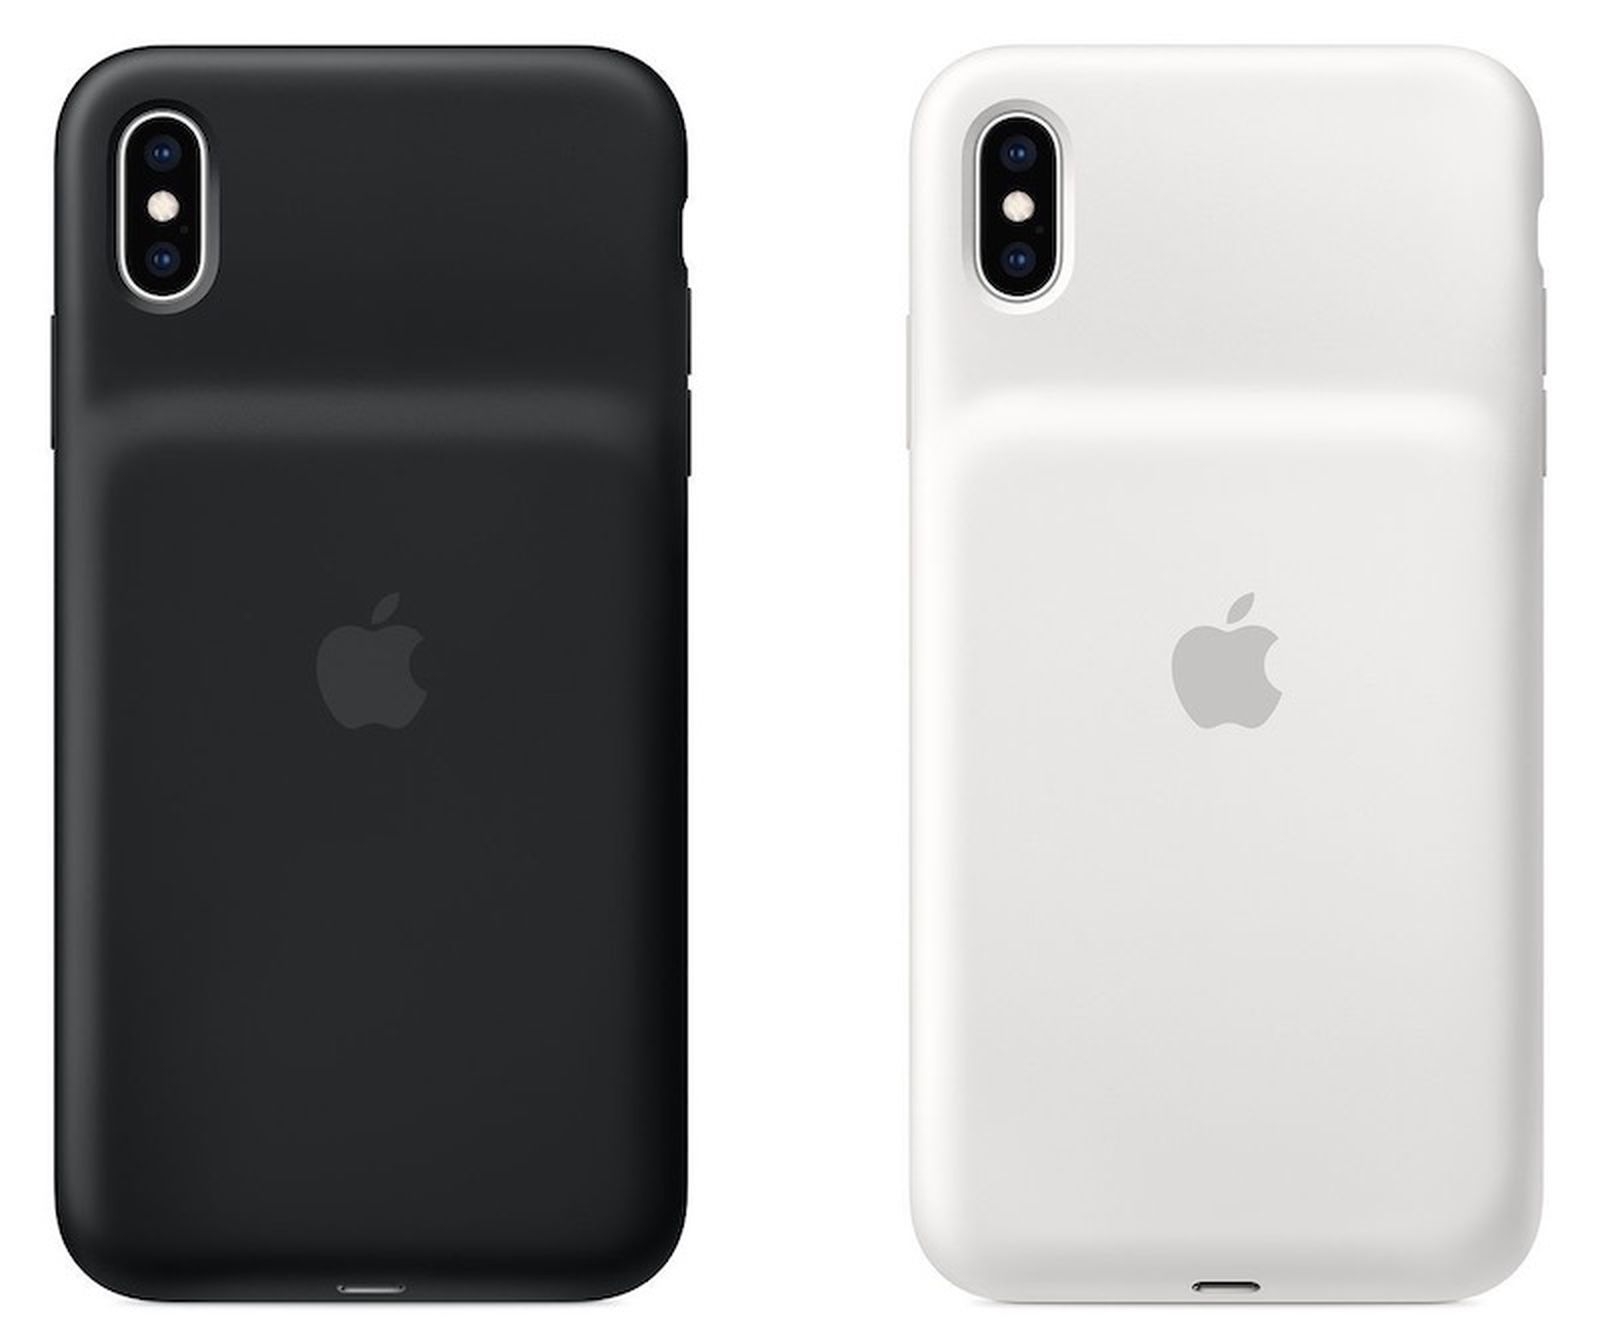 Tien jaar Onrecht Won Smart Battery Case for iPhone XS Appears to Be Compatible With iPhone X -  MacRumors